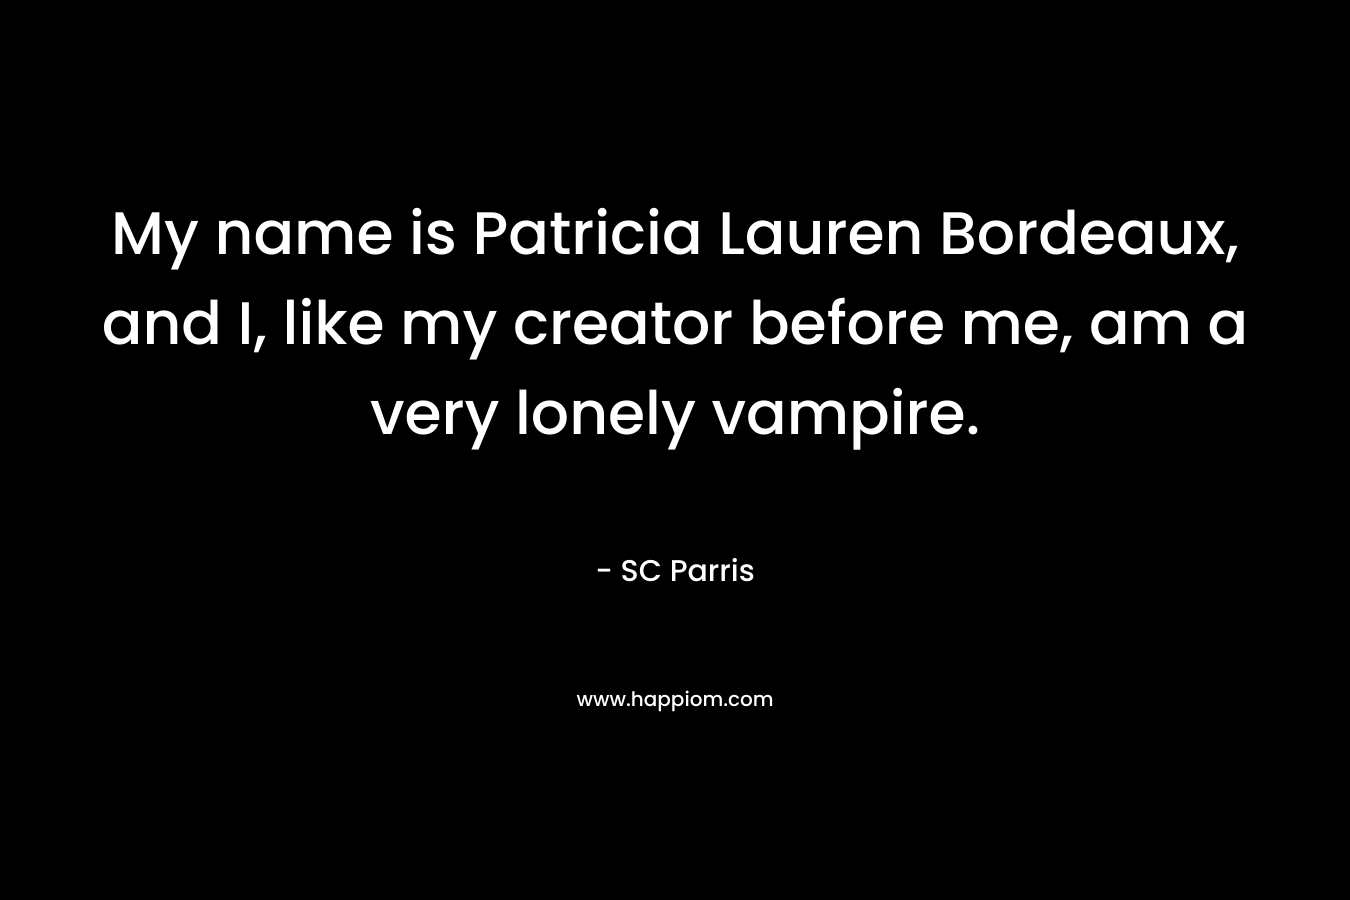 My name is Patricia Lauren Bordeaux, and I, like my creator before me, am a very lonely vampire.